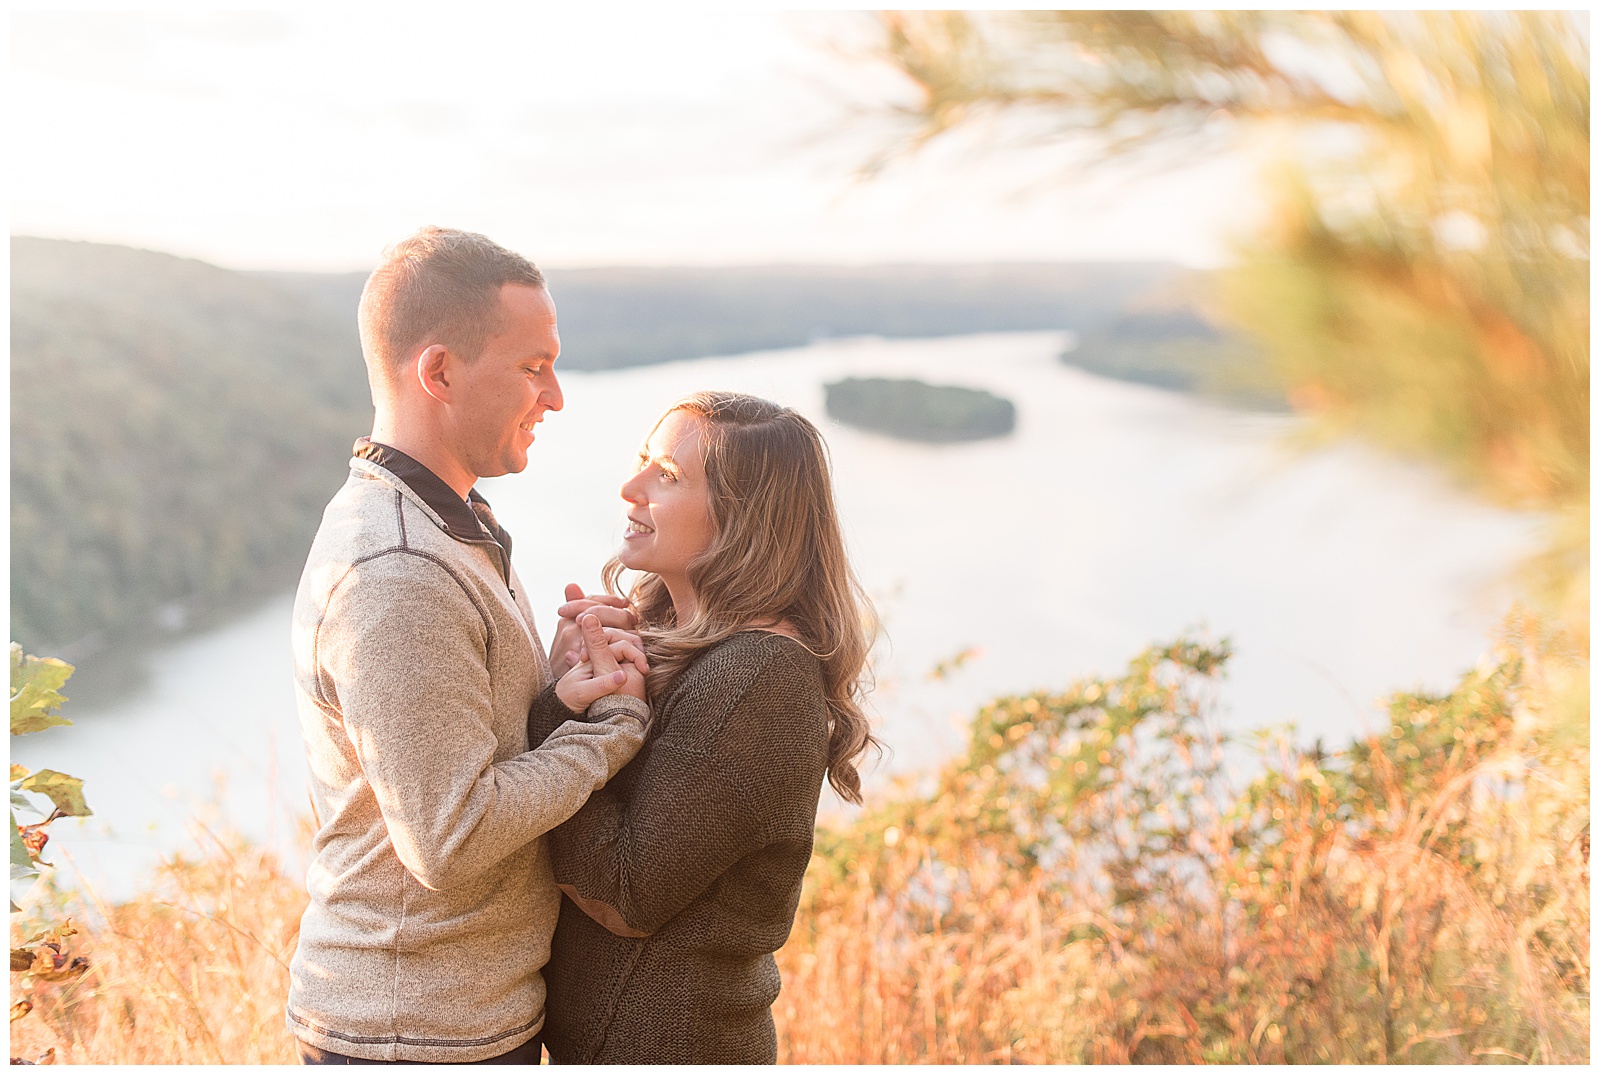 engaged couple standing close with their hands held between them as they smile and look at each other on fall day at pinnacle overlook in pennsylvania